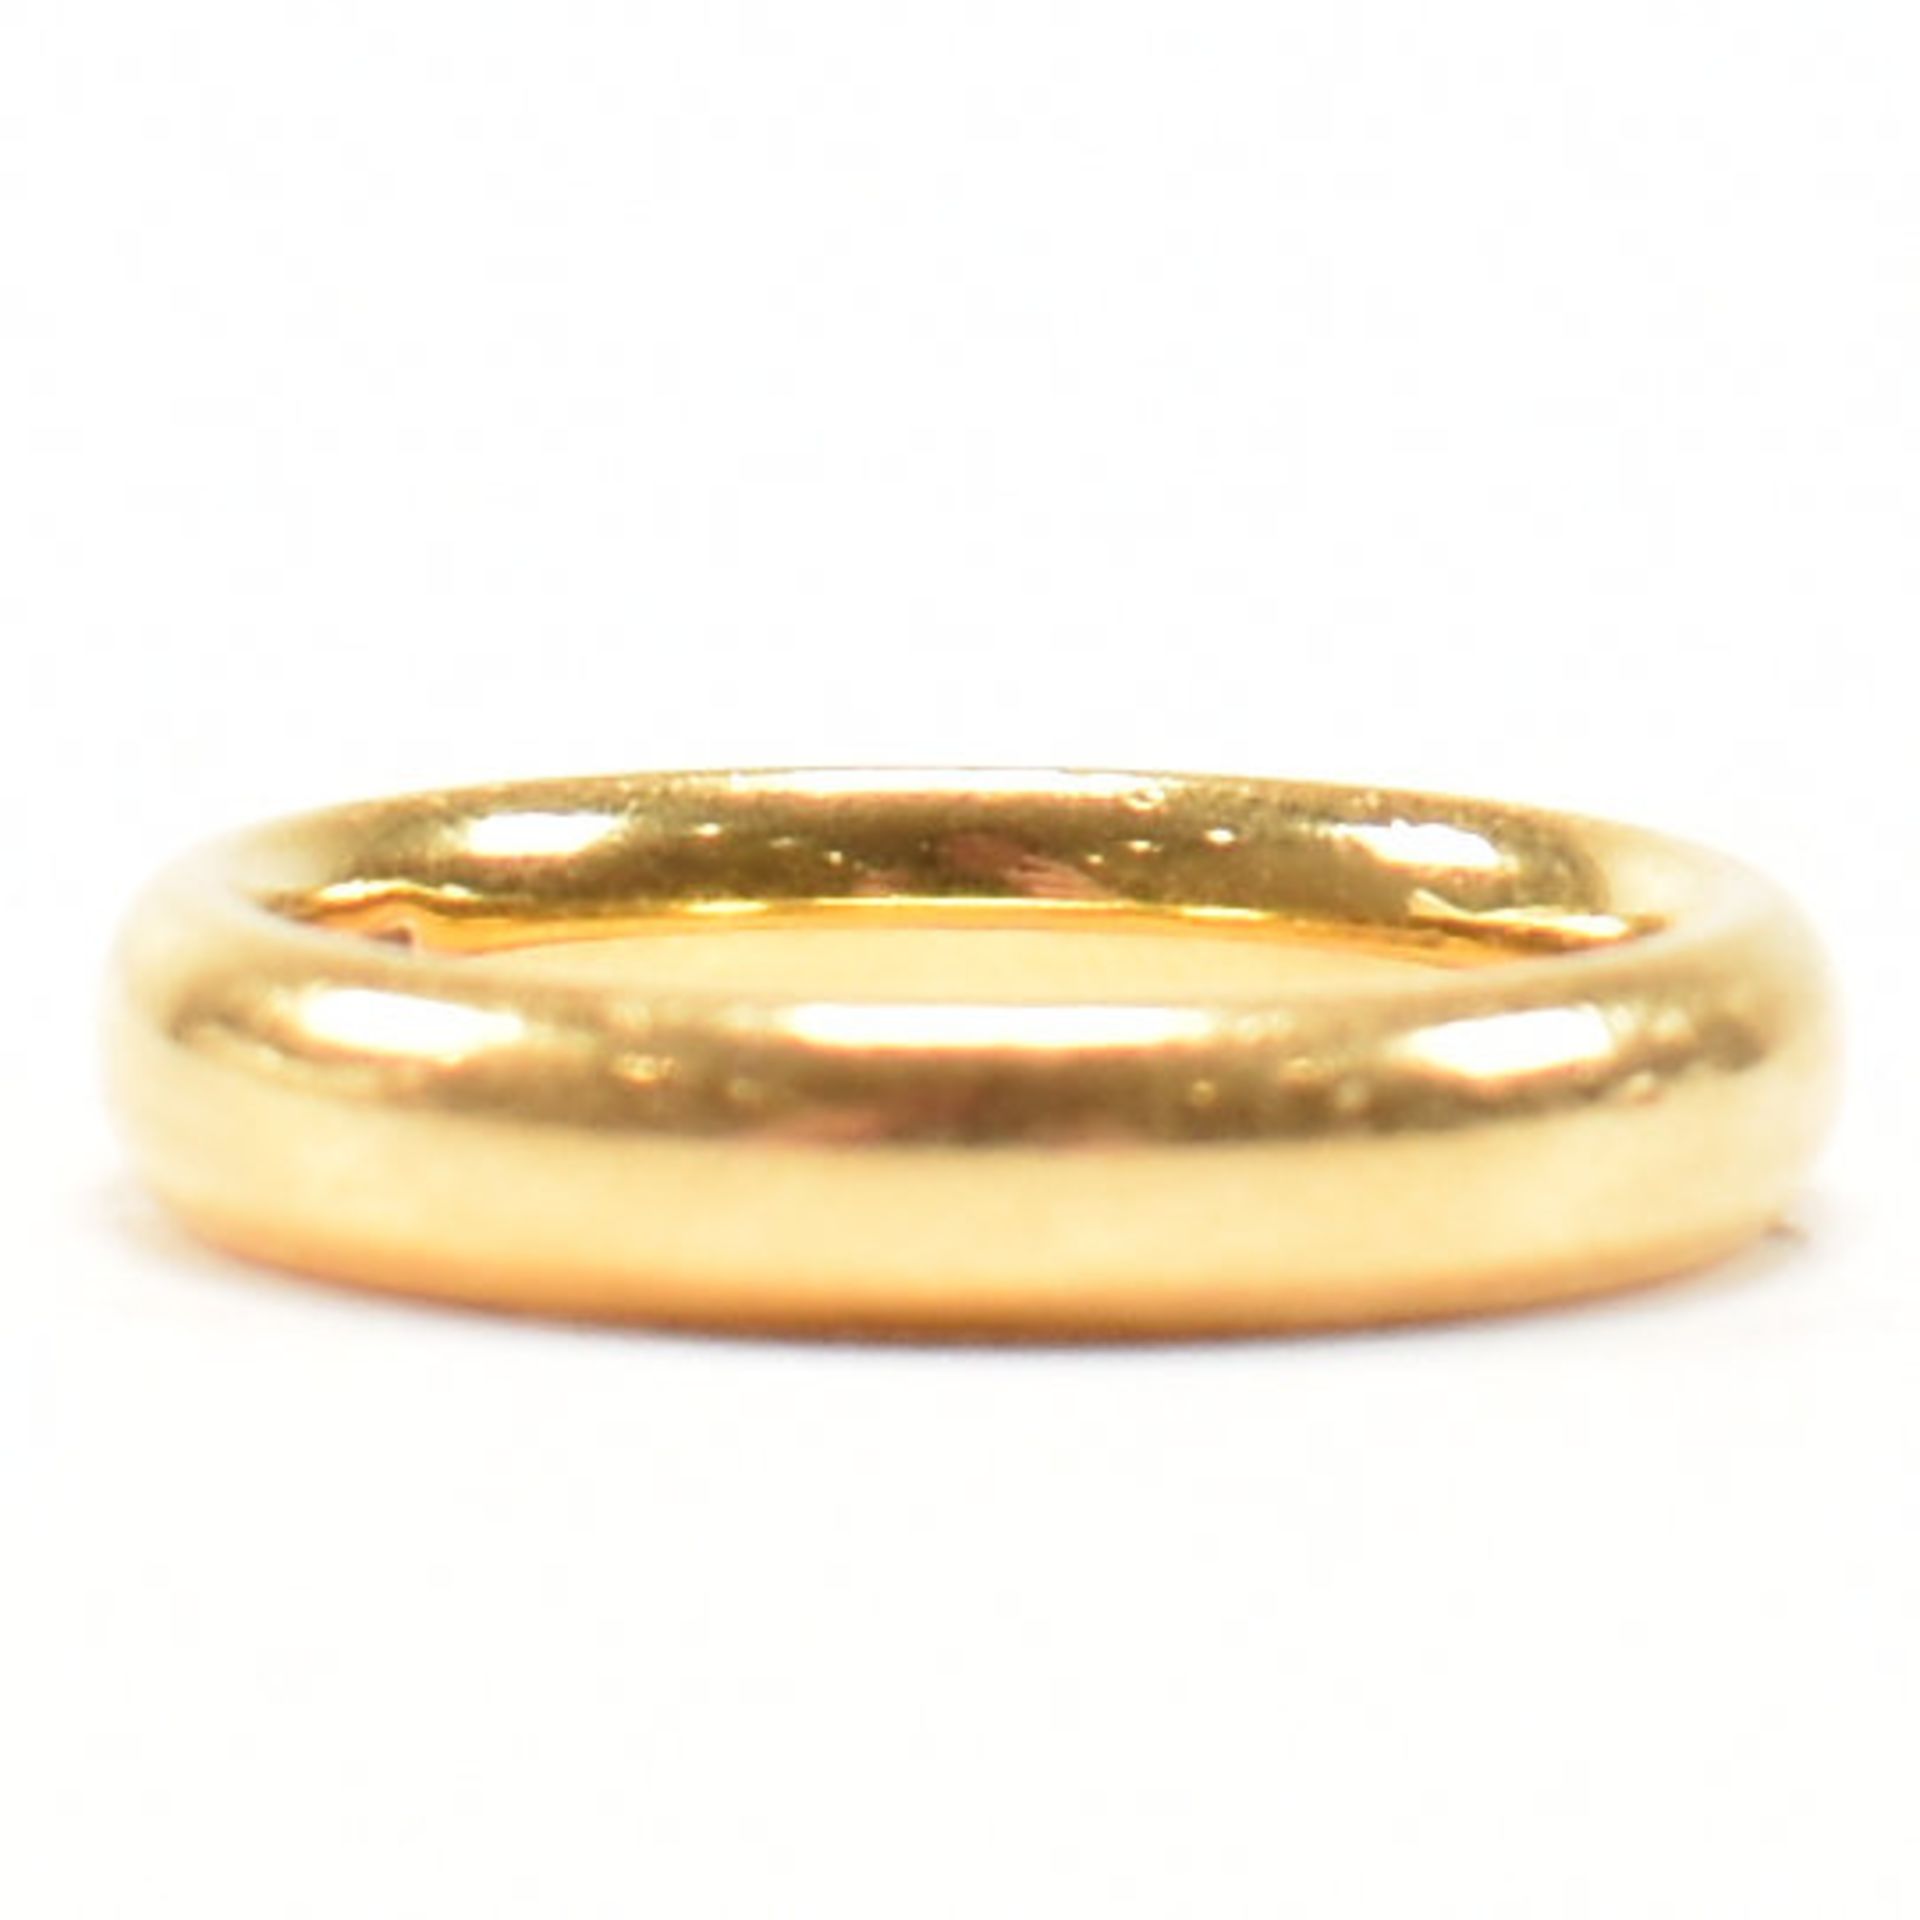 HALLMARKED 22CT GOLD BAND RING - Image 5 of 8